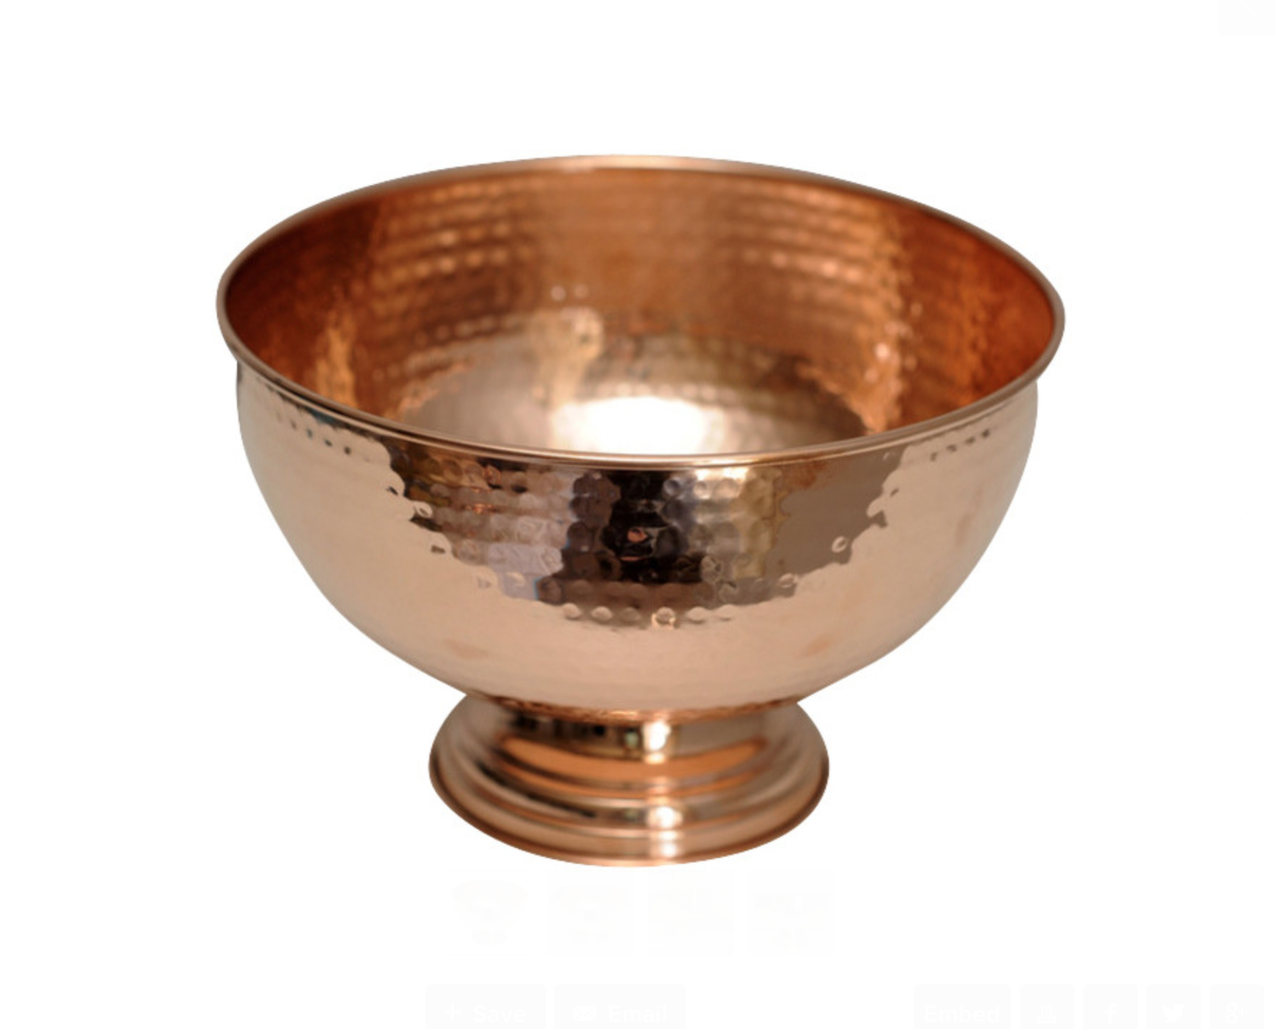 6 1/2” Diameter Handcrafted Hammered Copper Mixing Bowl